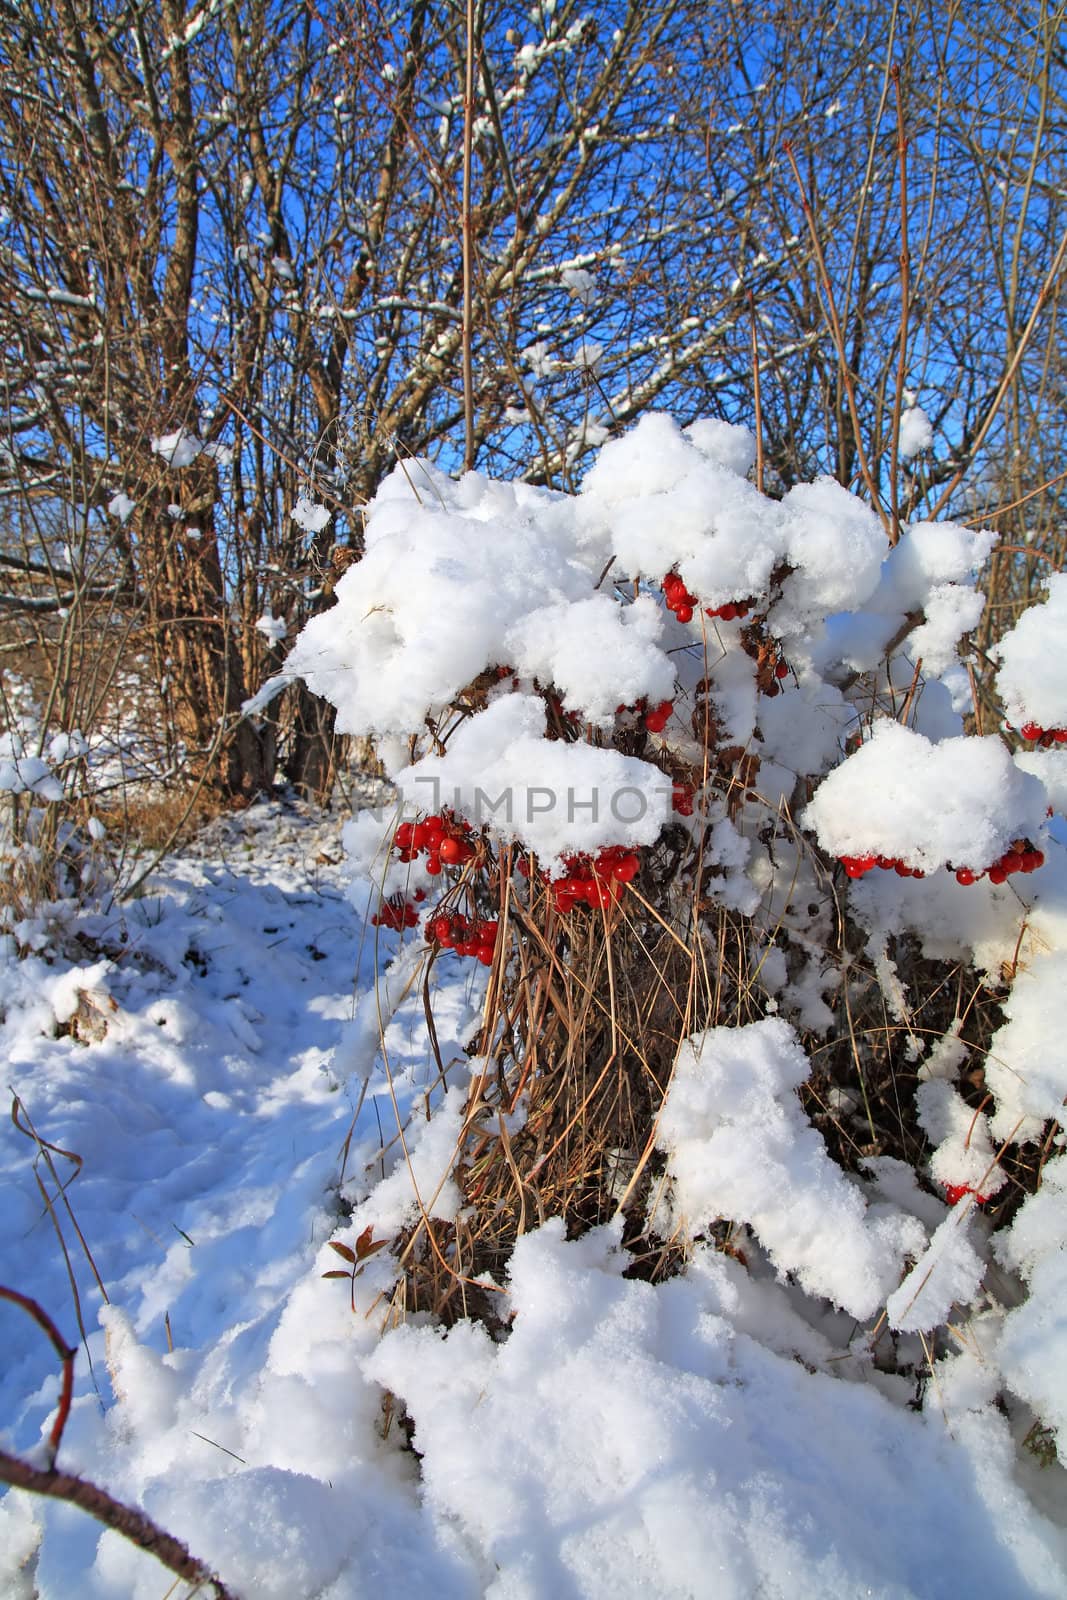 red berries of the viburnum in snow by basel101658